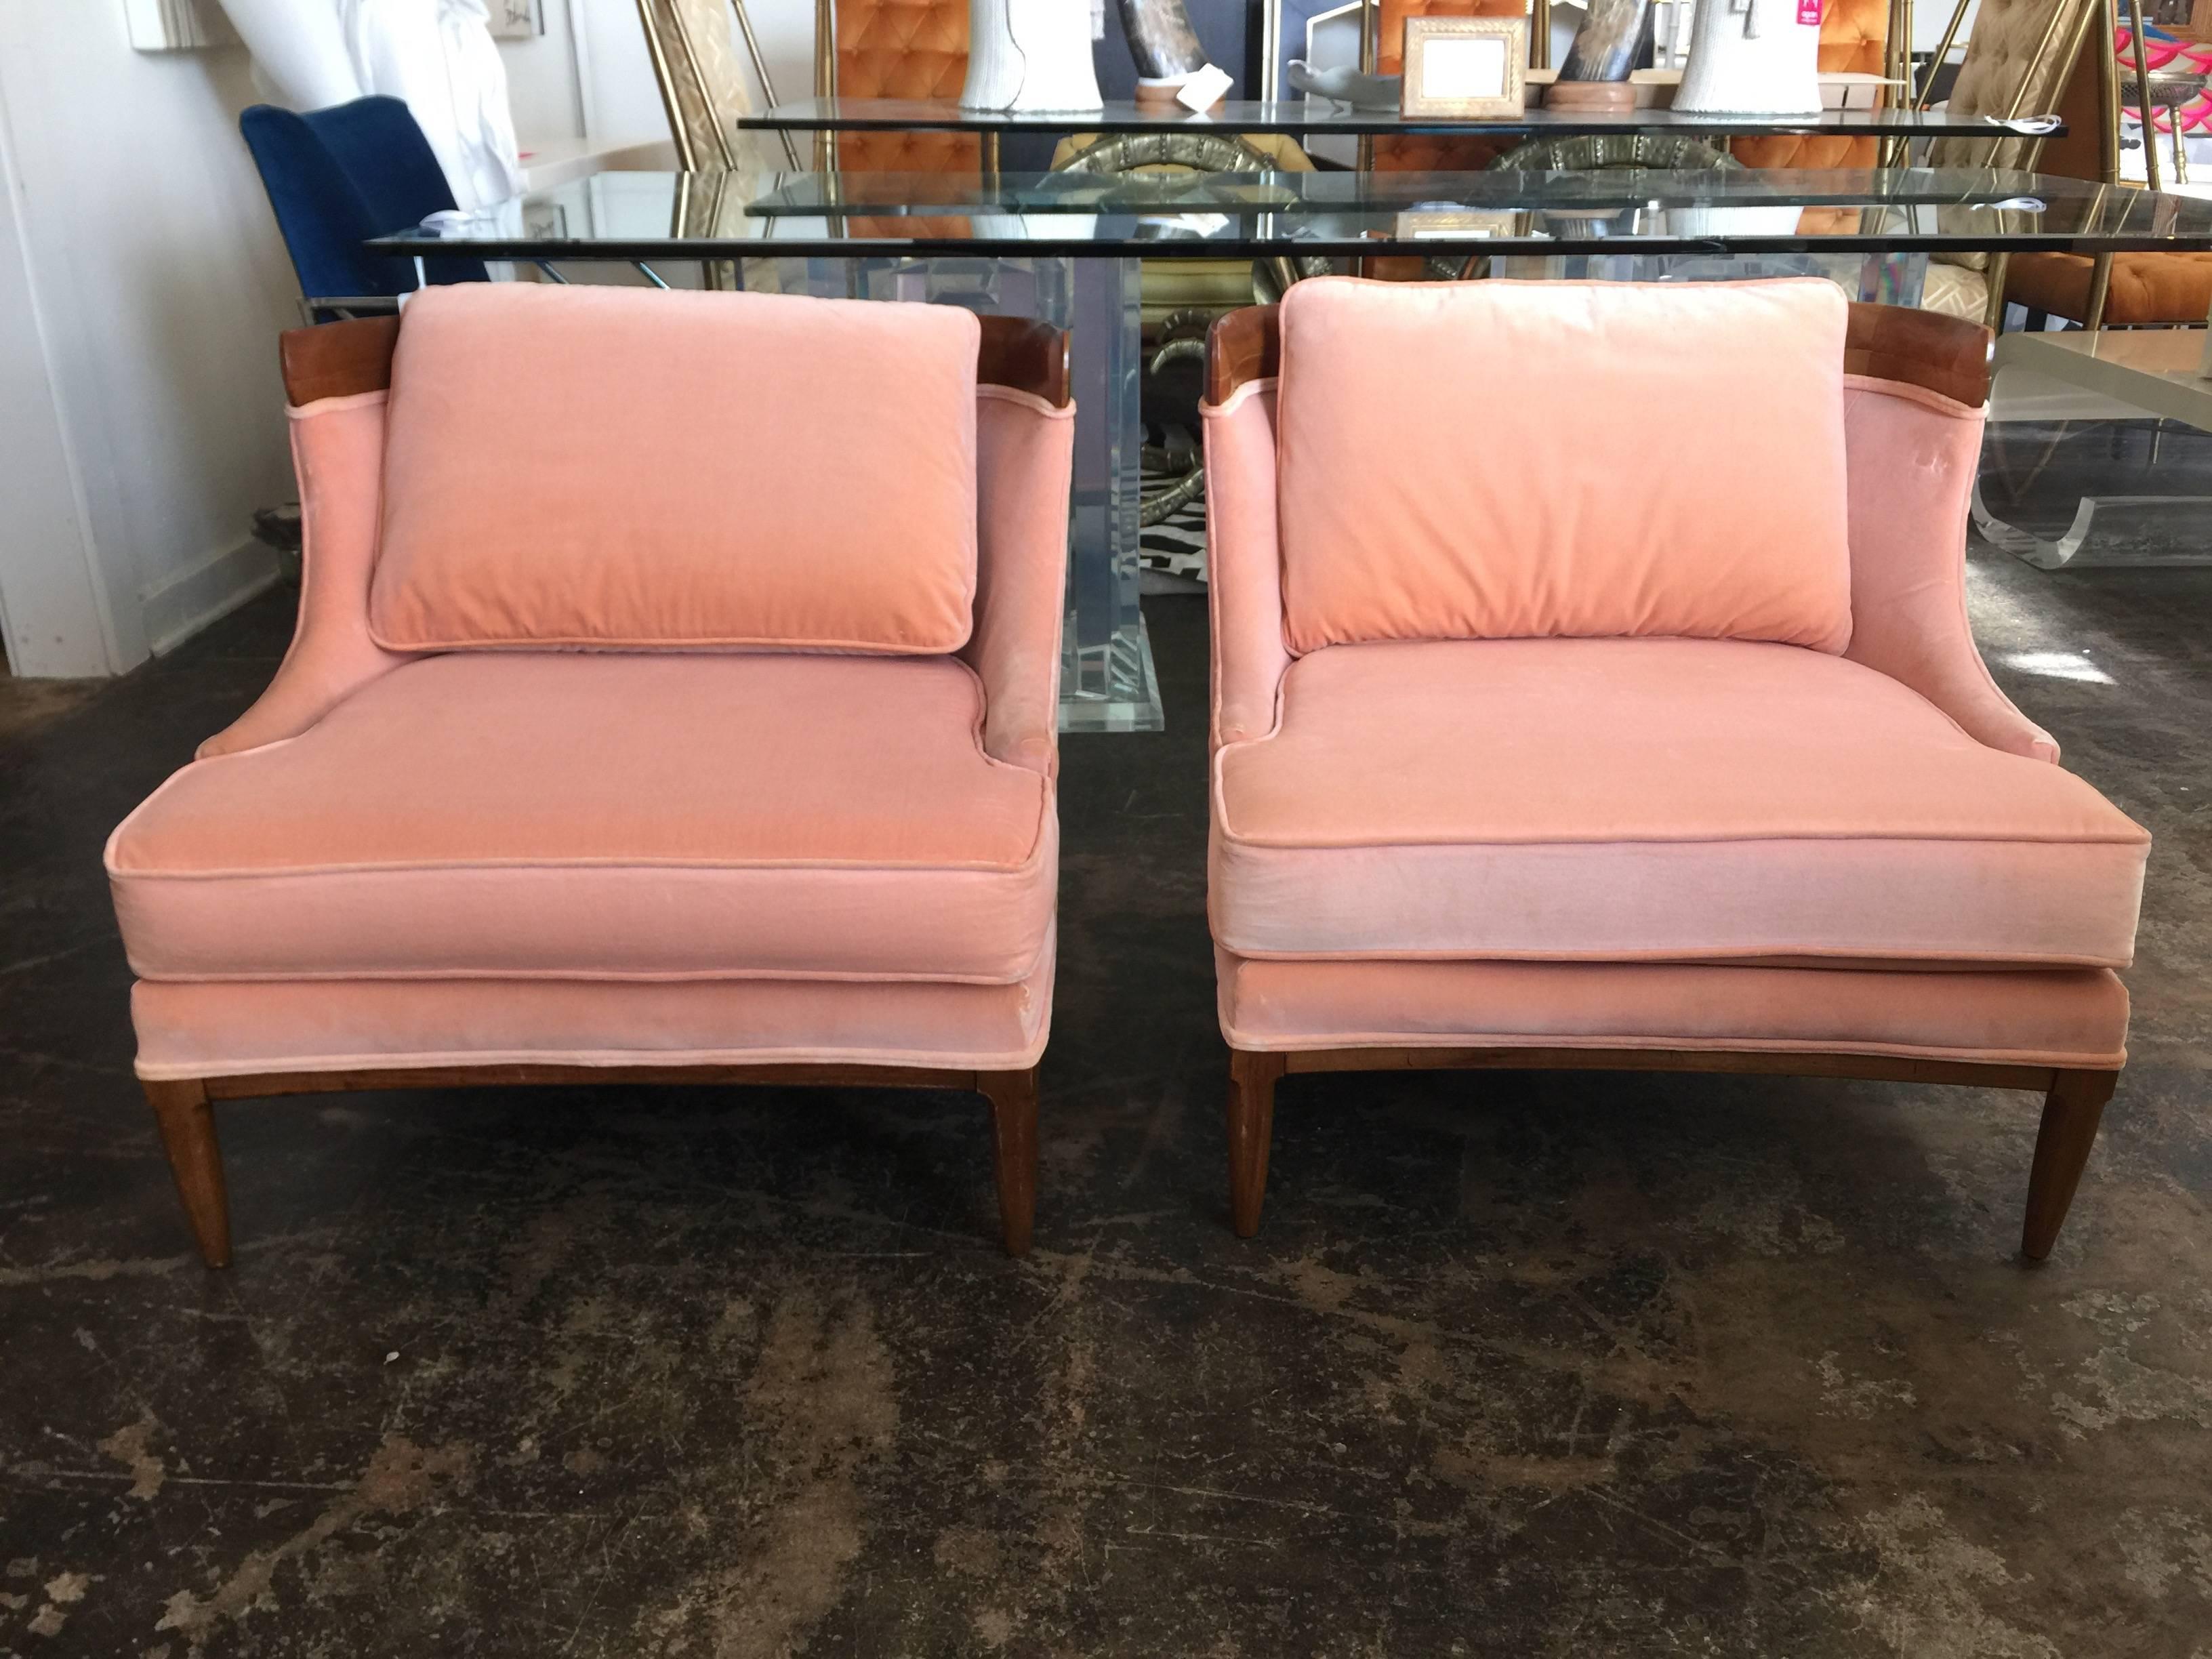 Pair of Tomlinson slipper chairs by Erwin Lambeth. Upholstered in a soft peachy pink velvet.

Dimensions: 30